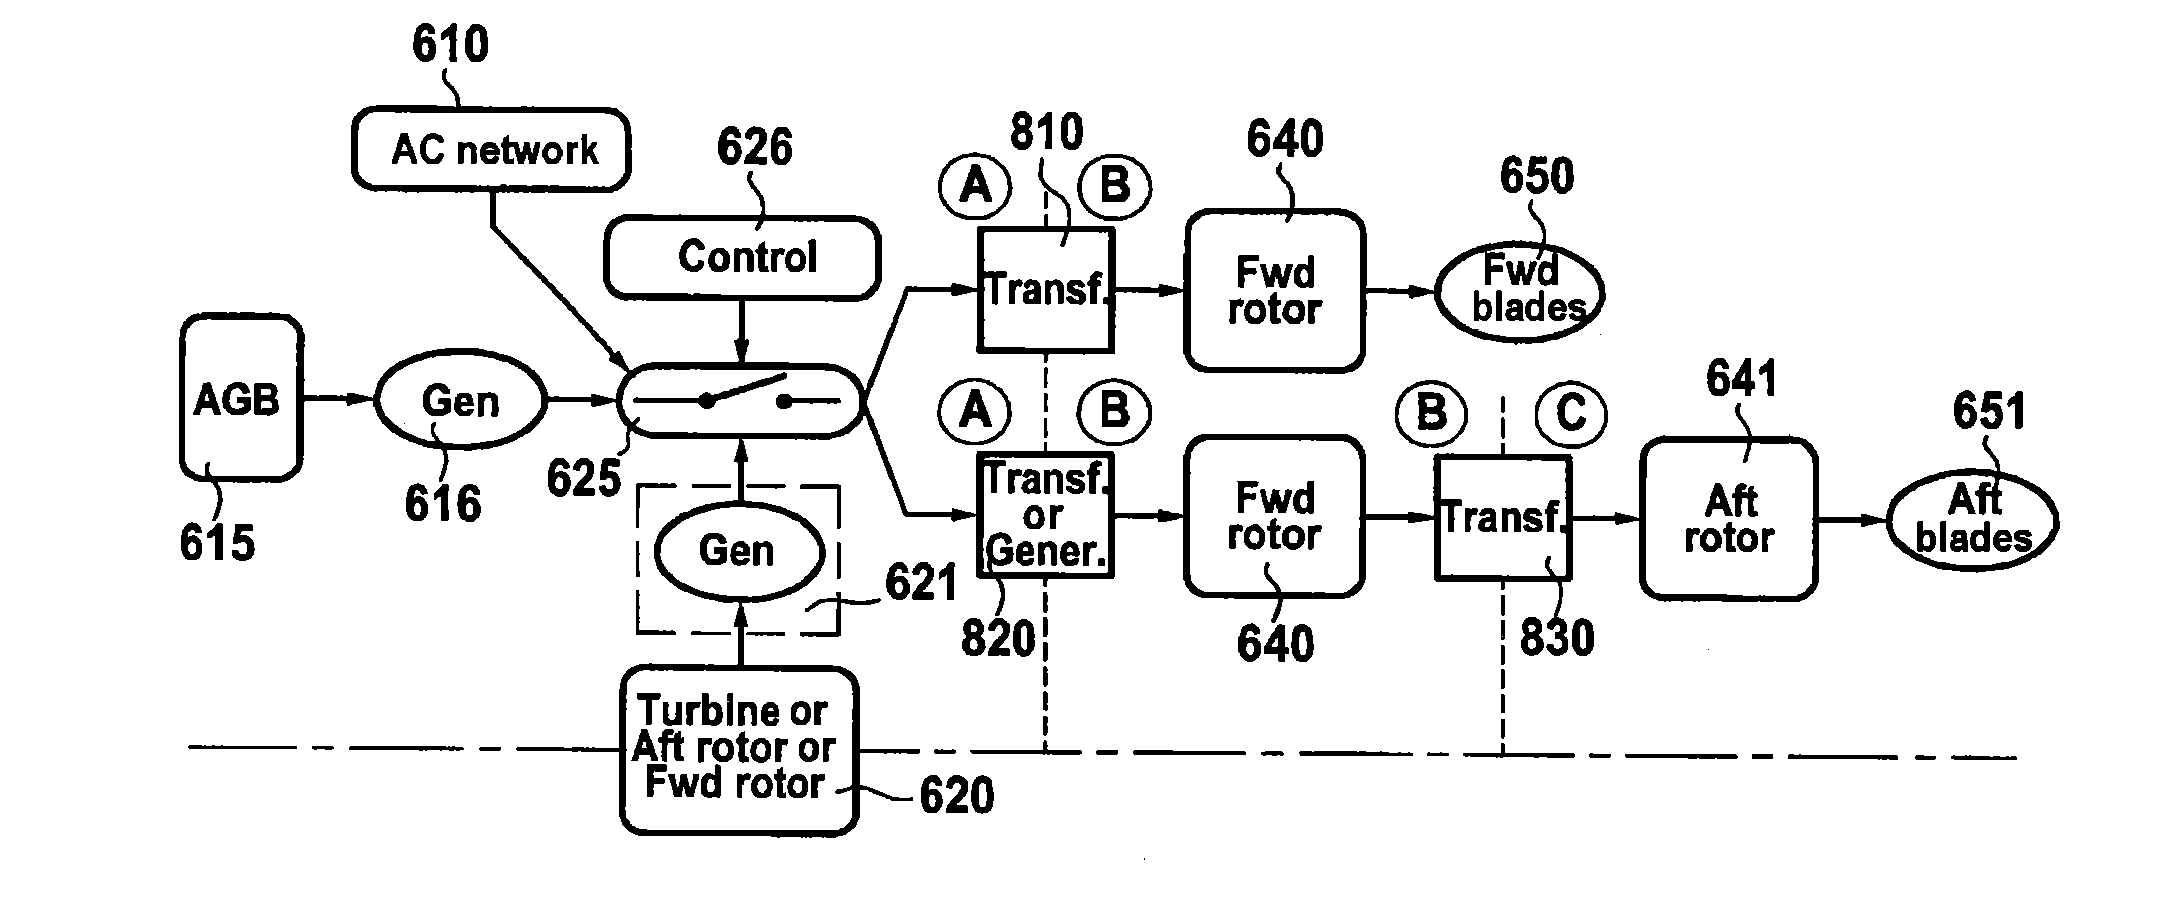 Electrical power supply system comprising an asynchronous machine, and an engine fitted with such an electrical power supply system